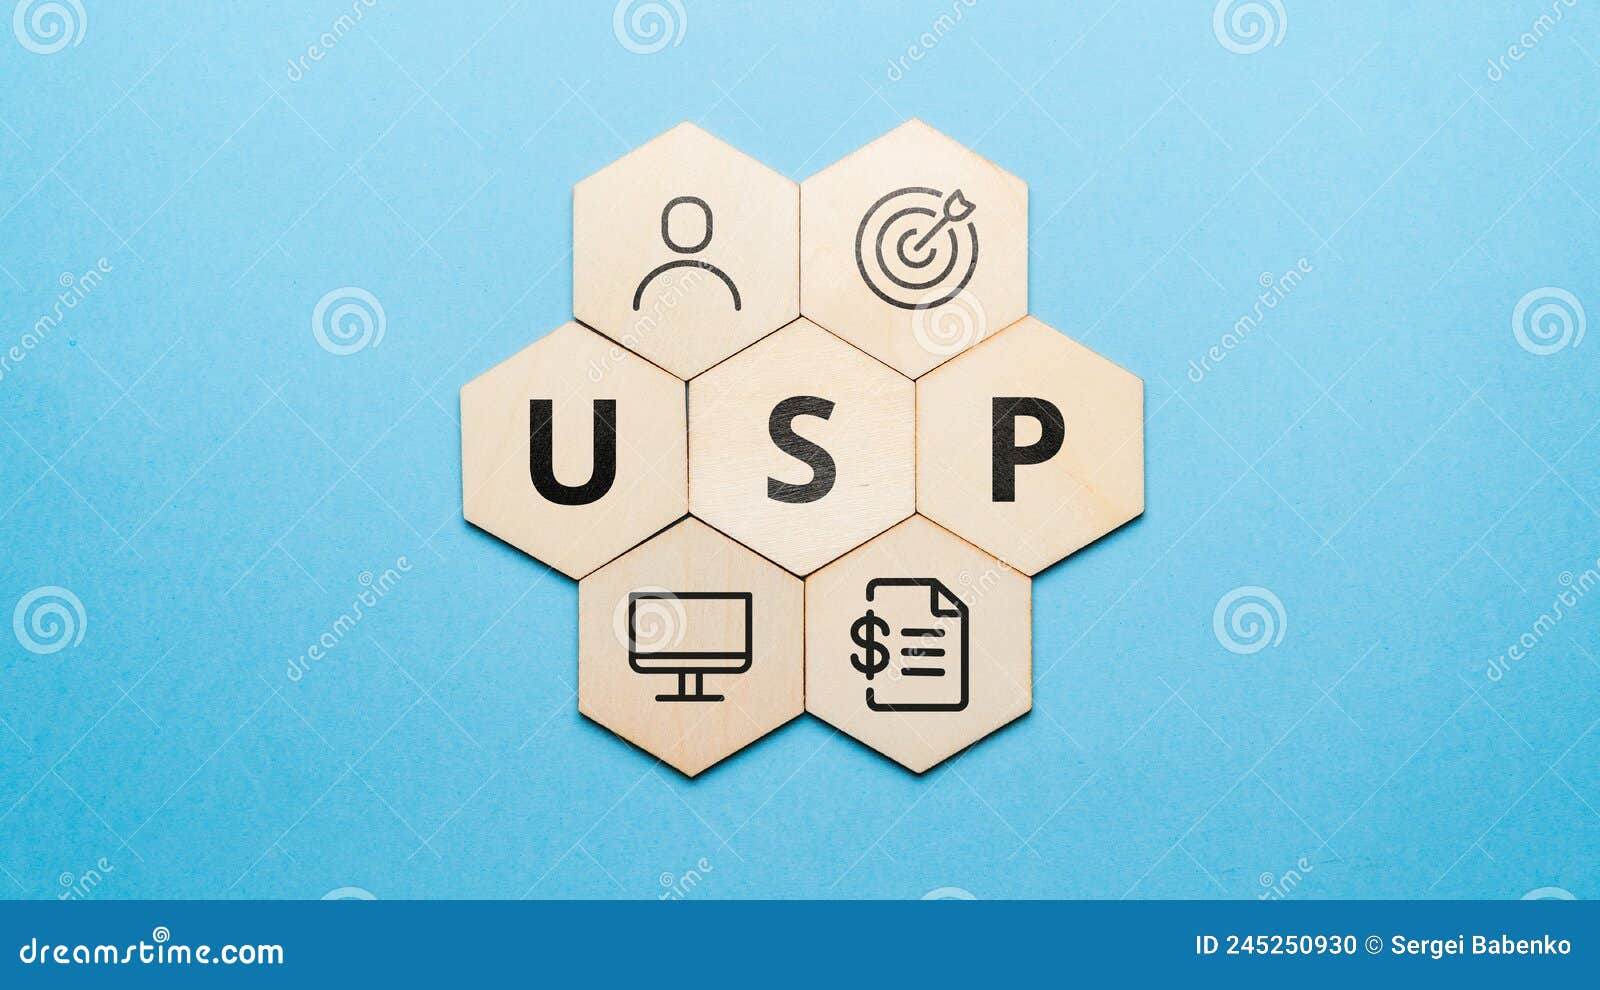 acronym usp or unique selling proposition. abstract icons and text on wooden forms